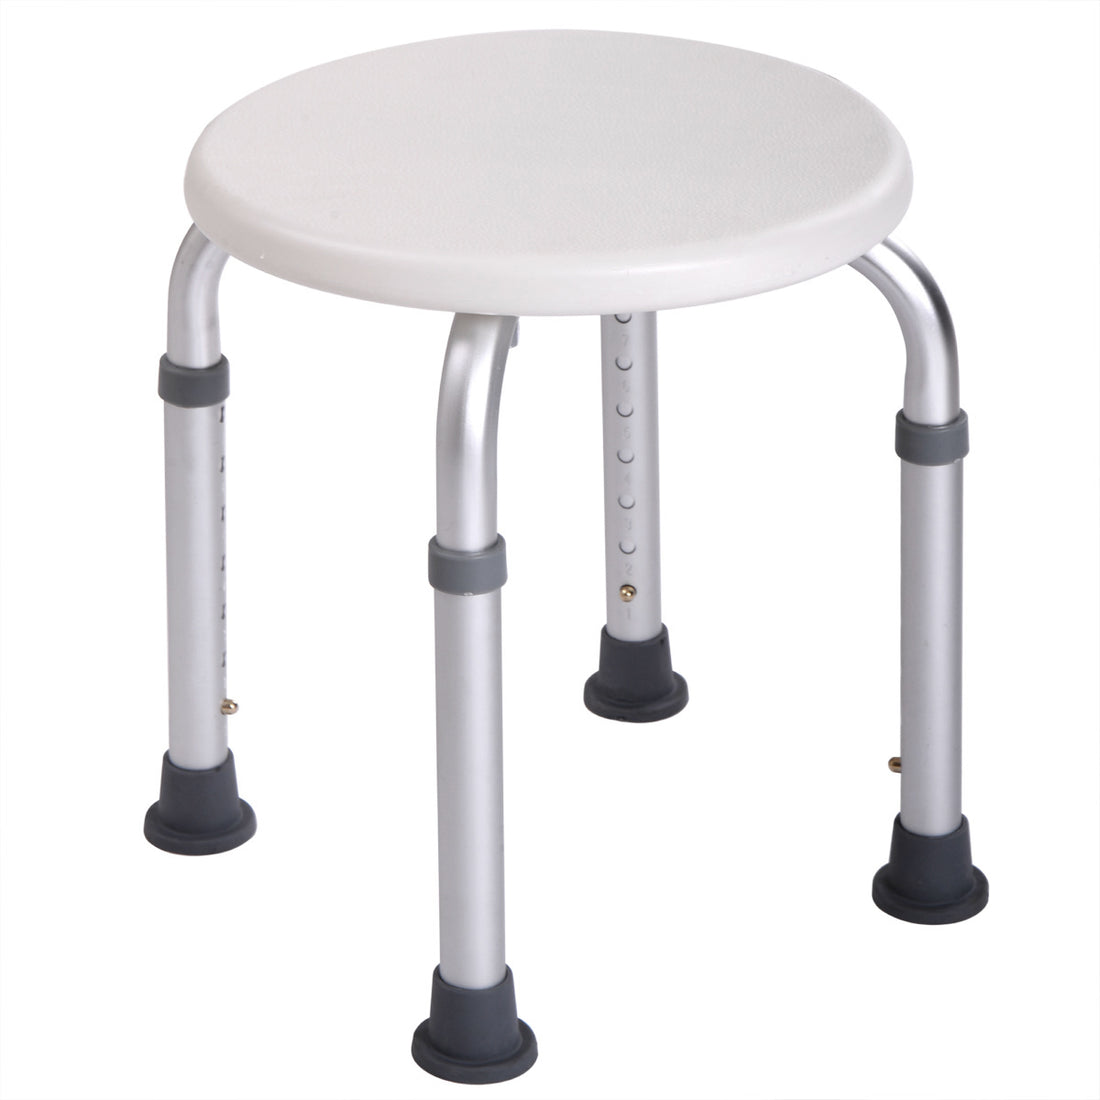 Shower Stool Bath Bench with Adjustable Heights and white-aluminium alloy